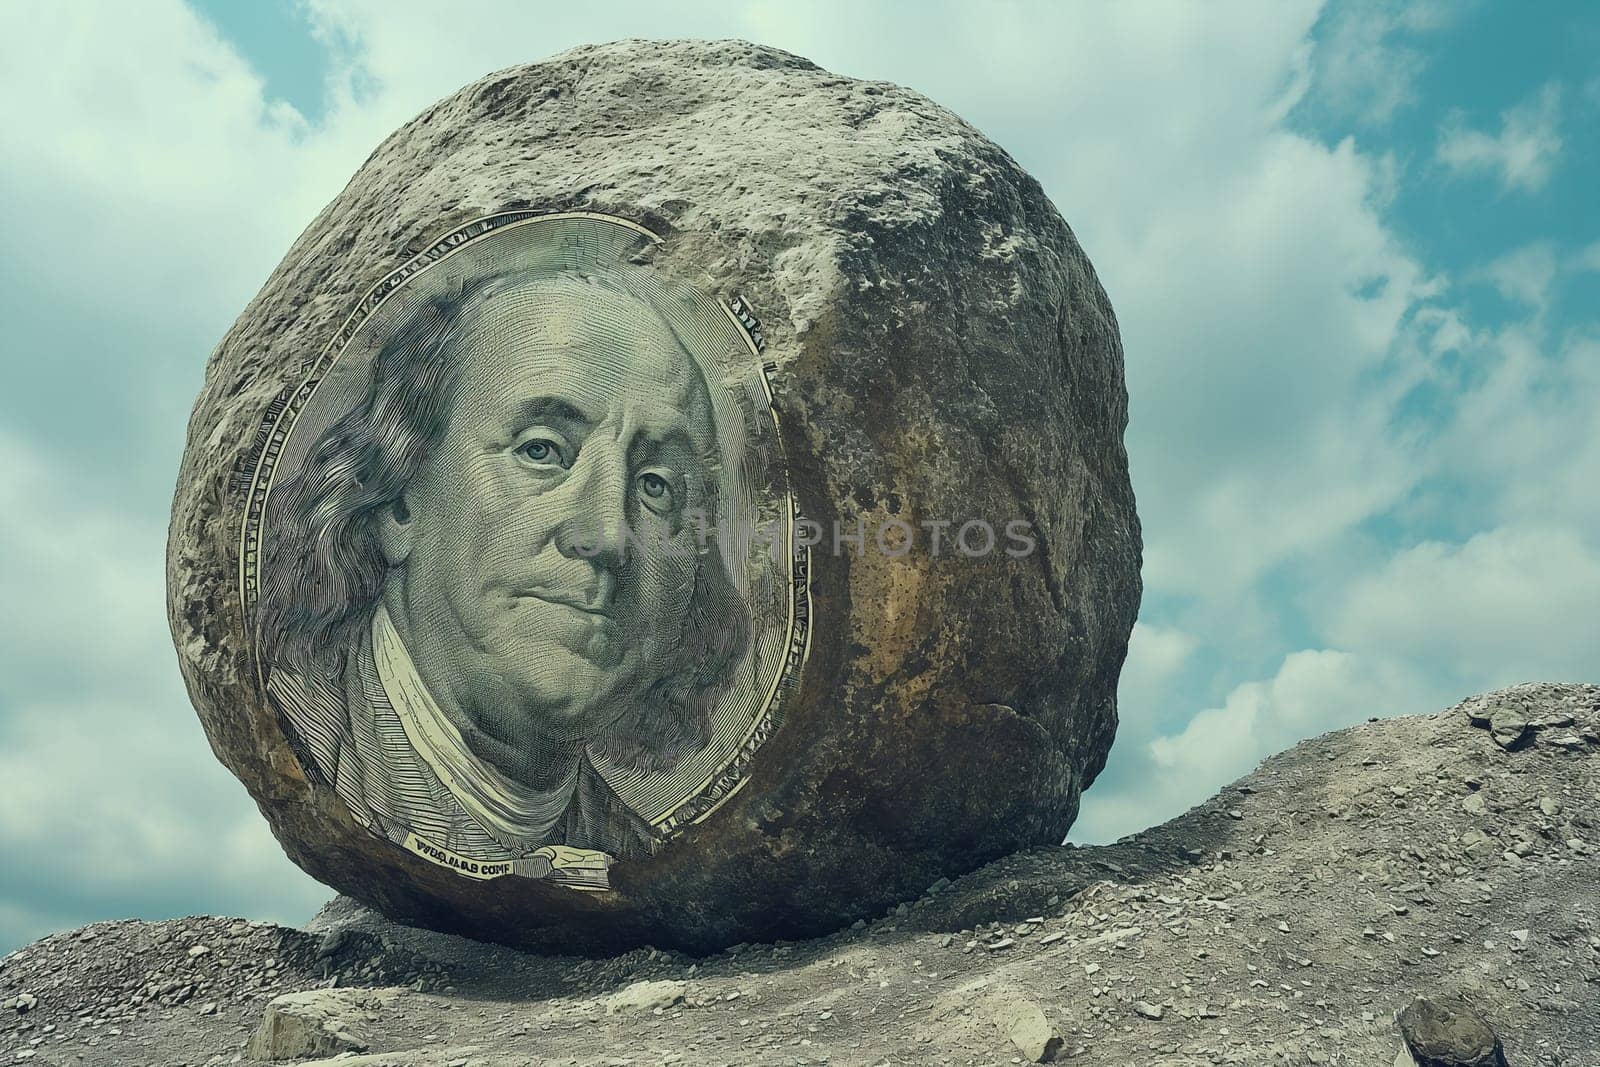 A man on a mountainside next to a stone with a dollar symbol. Crisis.